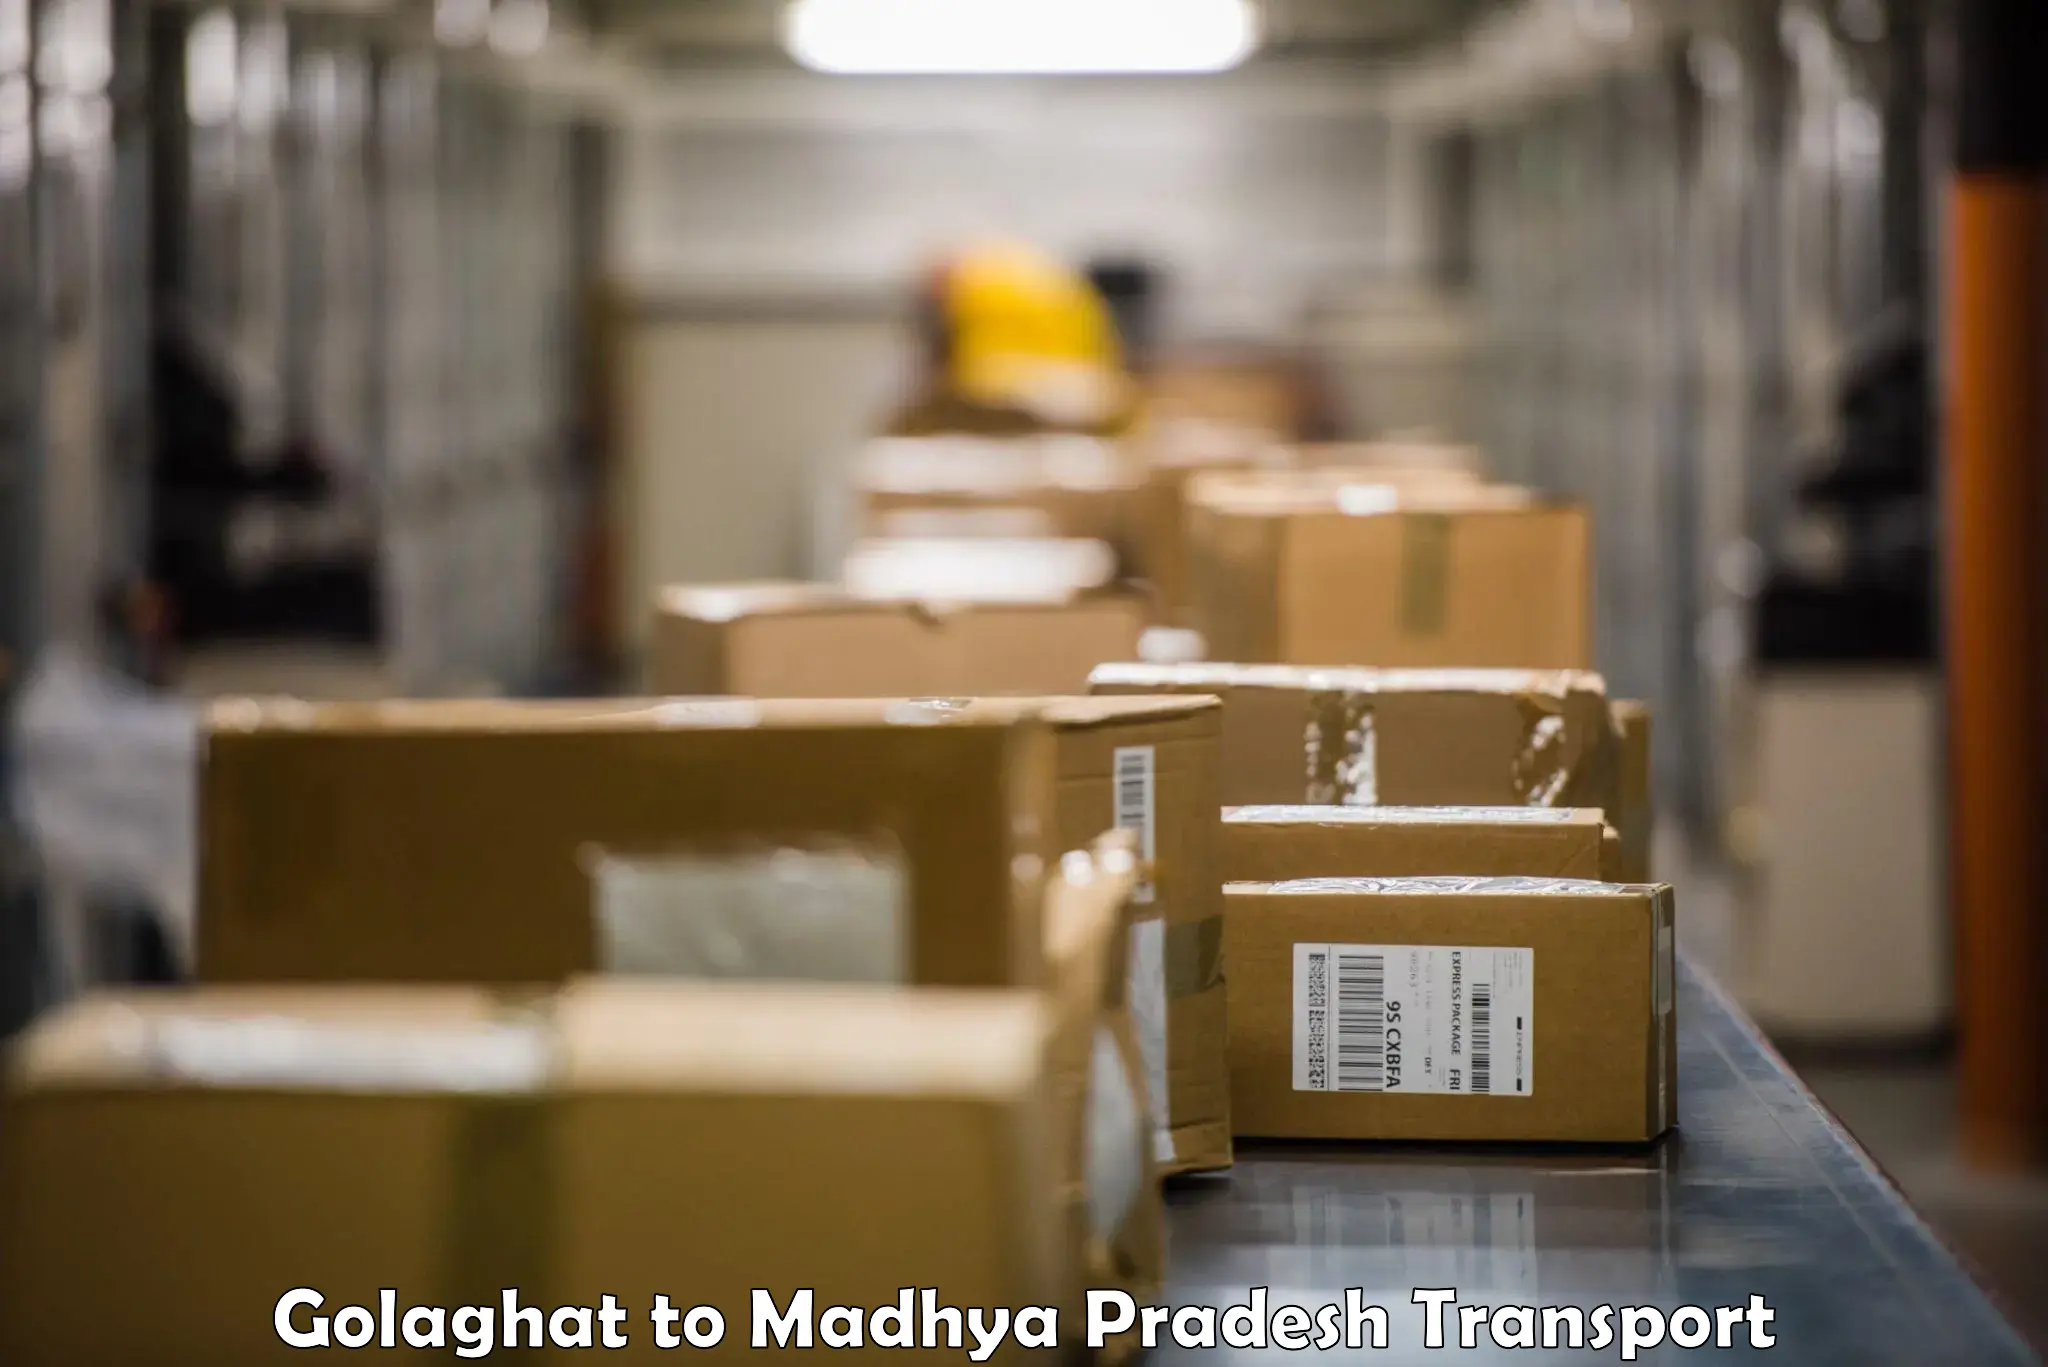 Truck transport companies in India Golaghat to Burhanpur